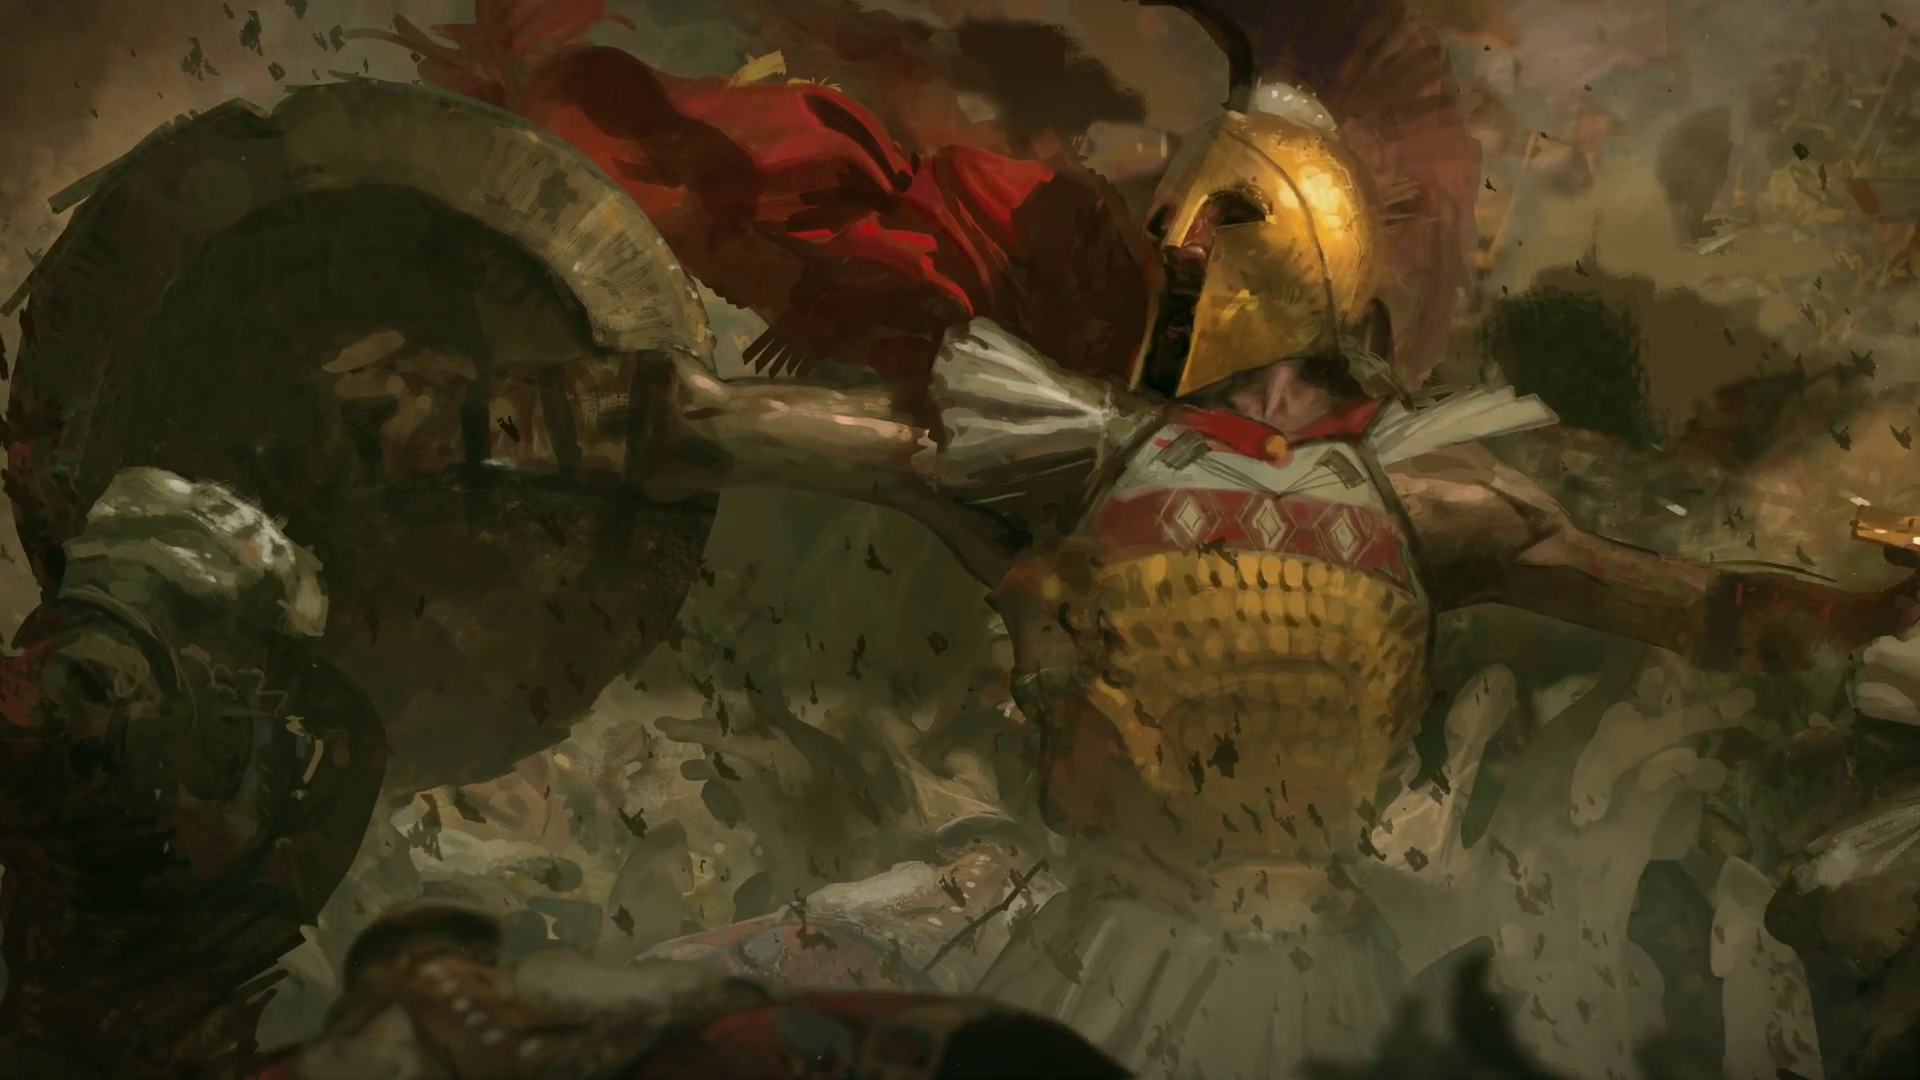 Age Of Empires 4 Announced, Along With Remasters For AOE 2 & 3